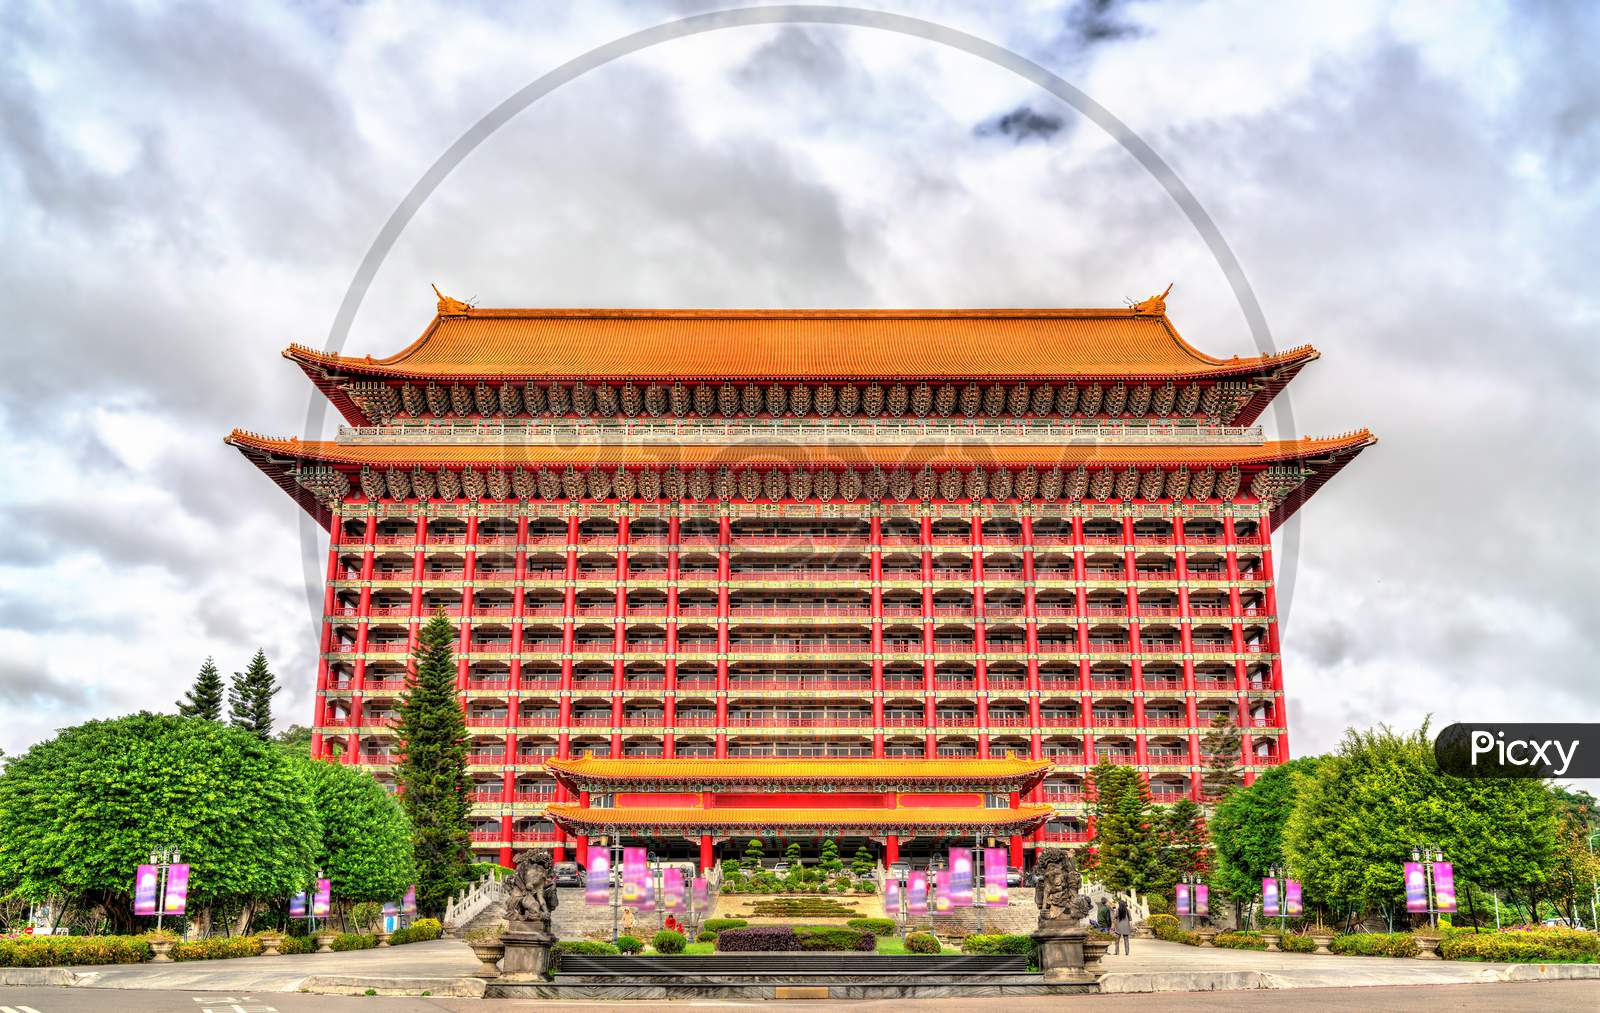 The Grand Hotel, A Historic Building In Taipei, Taiwan